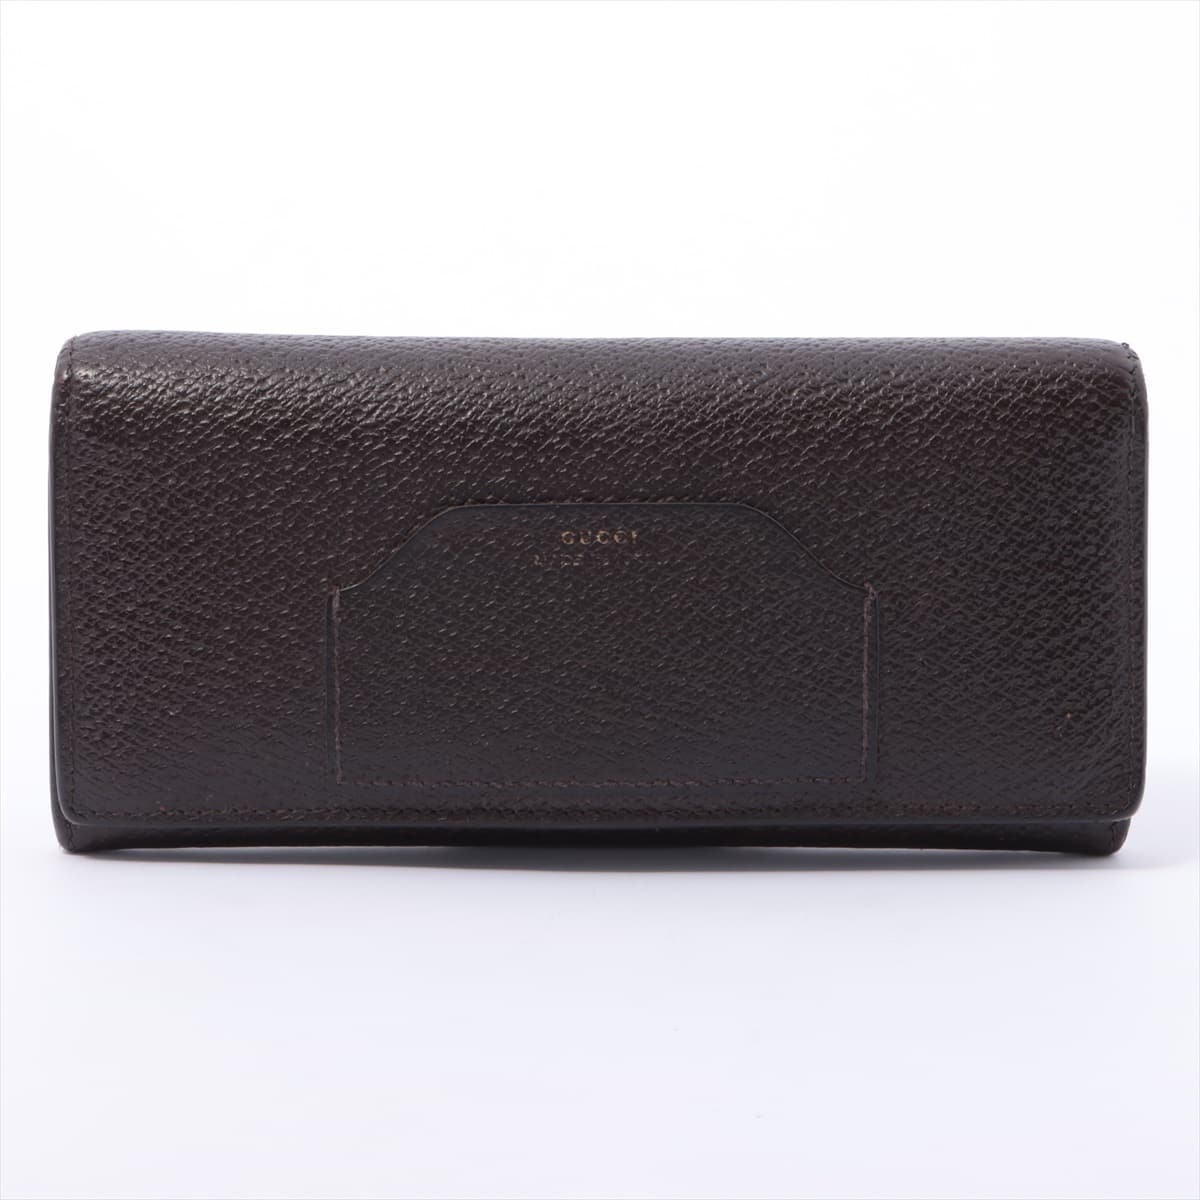 Gucci Logo 322104 Leather Wallet Brown